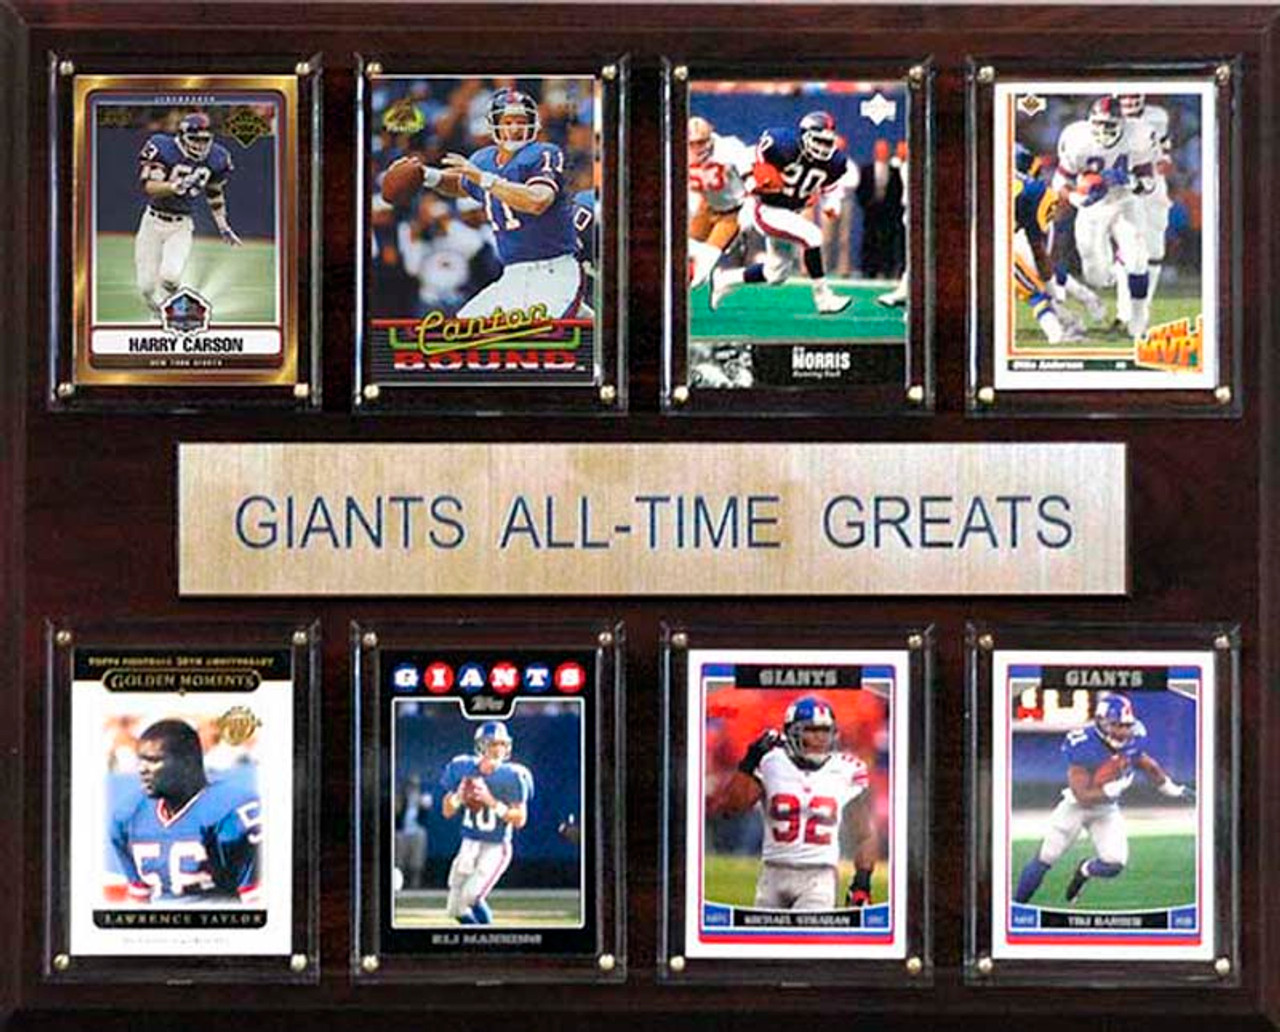 NFL 12"x15" New York Giants All-Time Greats Plaque